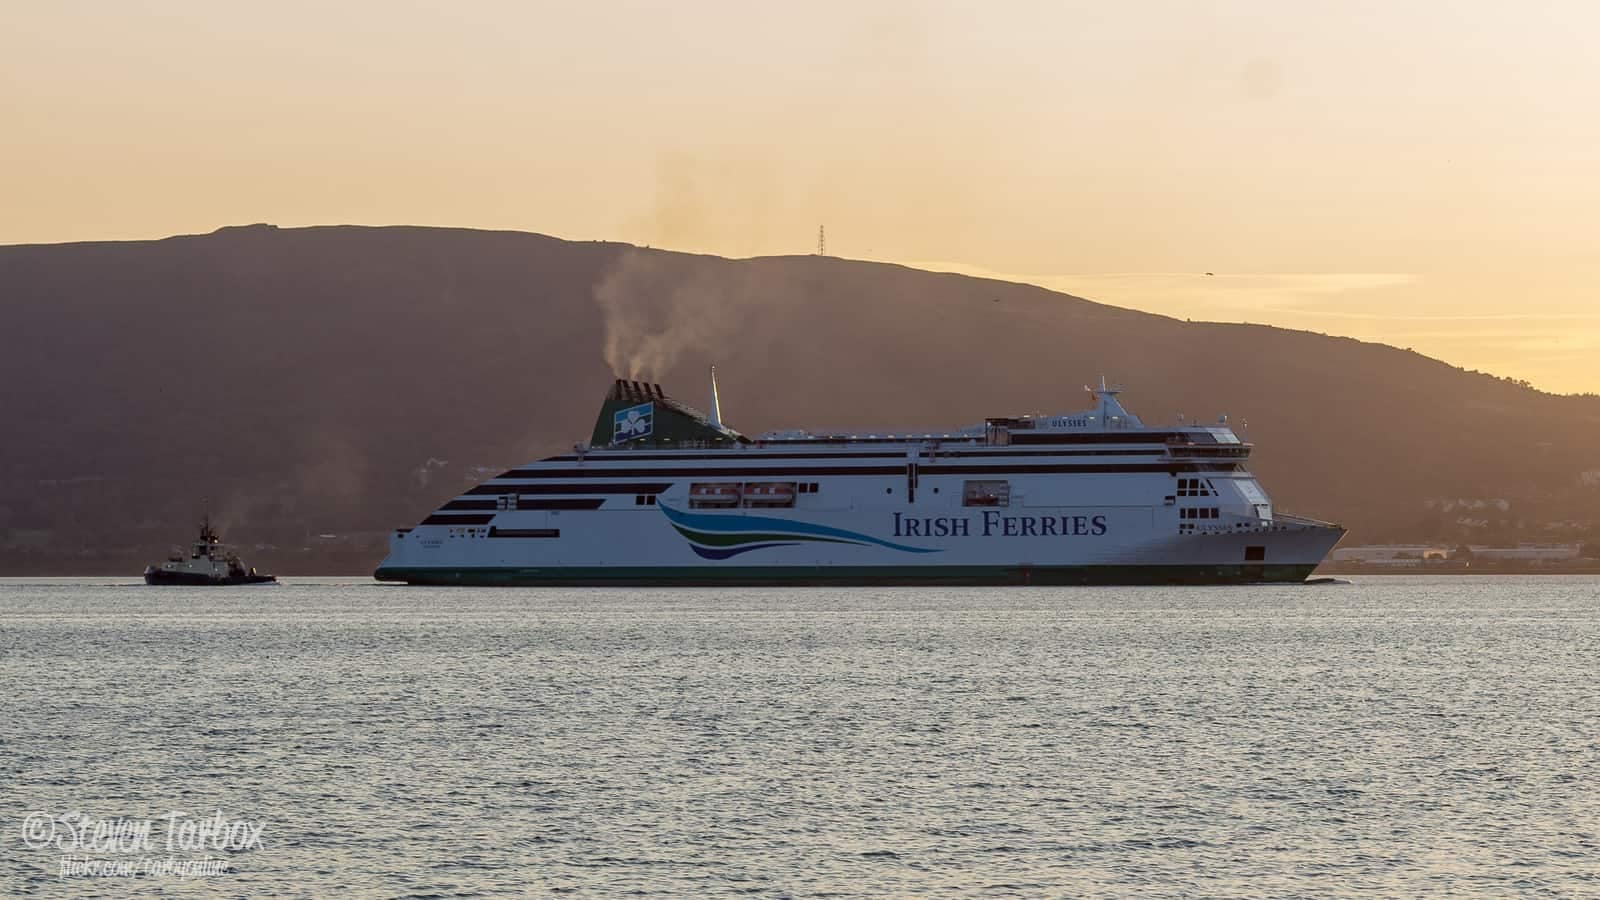 Irish Ferries ULYSSES leaves Belfast after spending almost a month in dry dock. Copyright Steven Tarbox